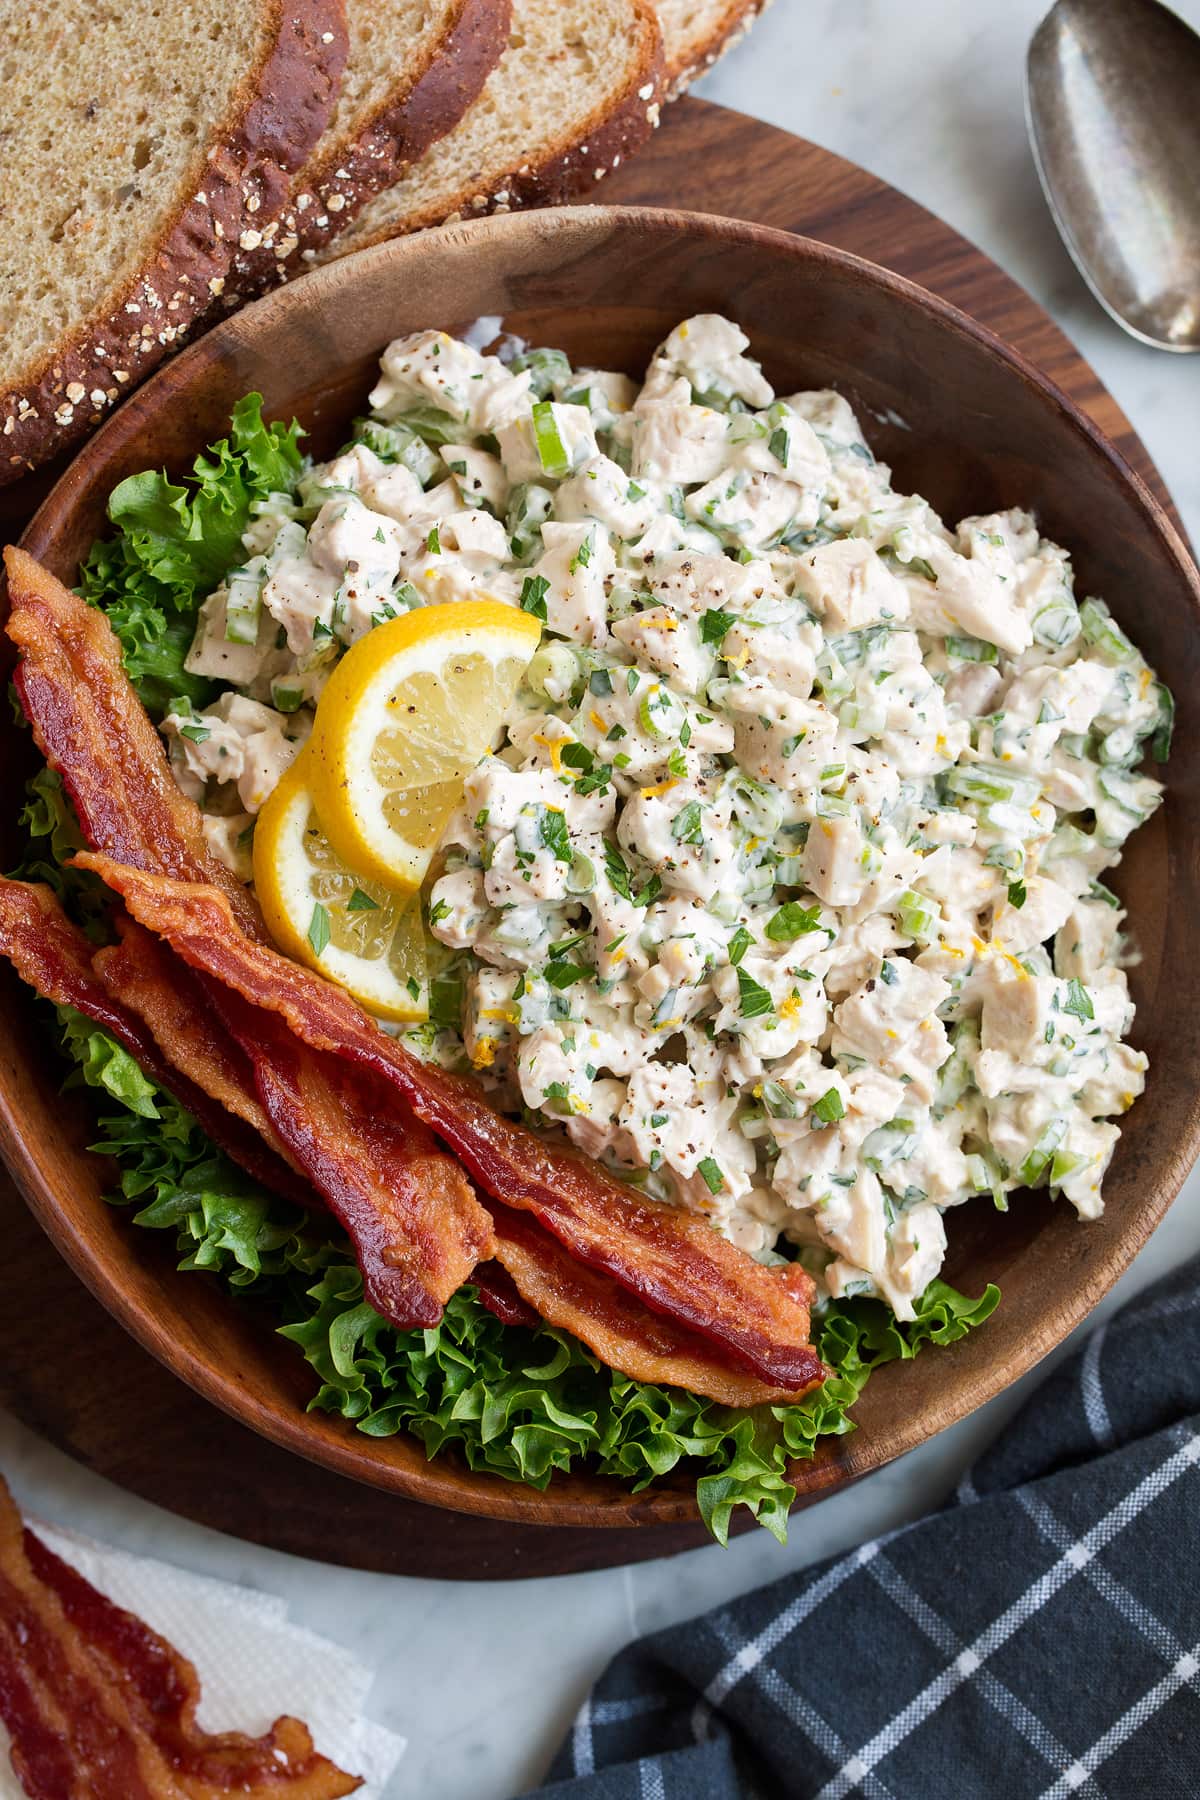 Chicken salad in a wooden bowl with a side of bacon and lettuce. It is garnished with lemon slices and there are slices of bread to the side of the bowl.